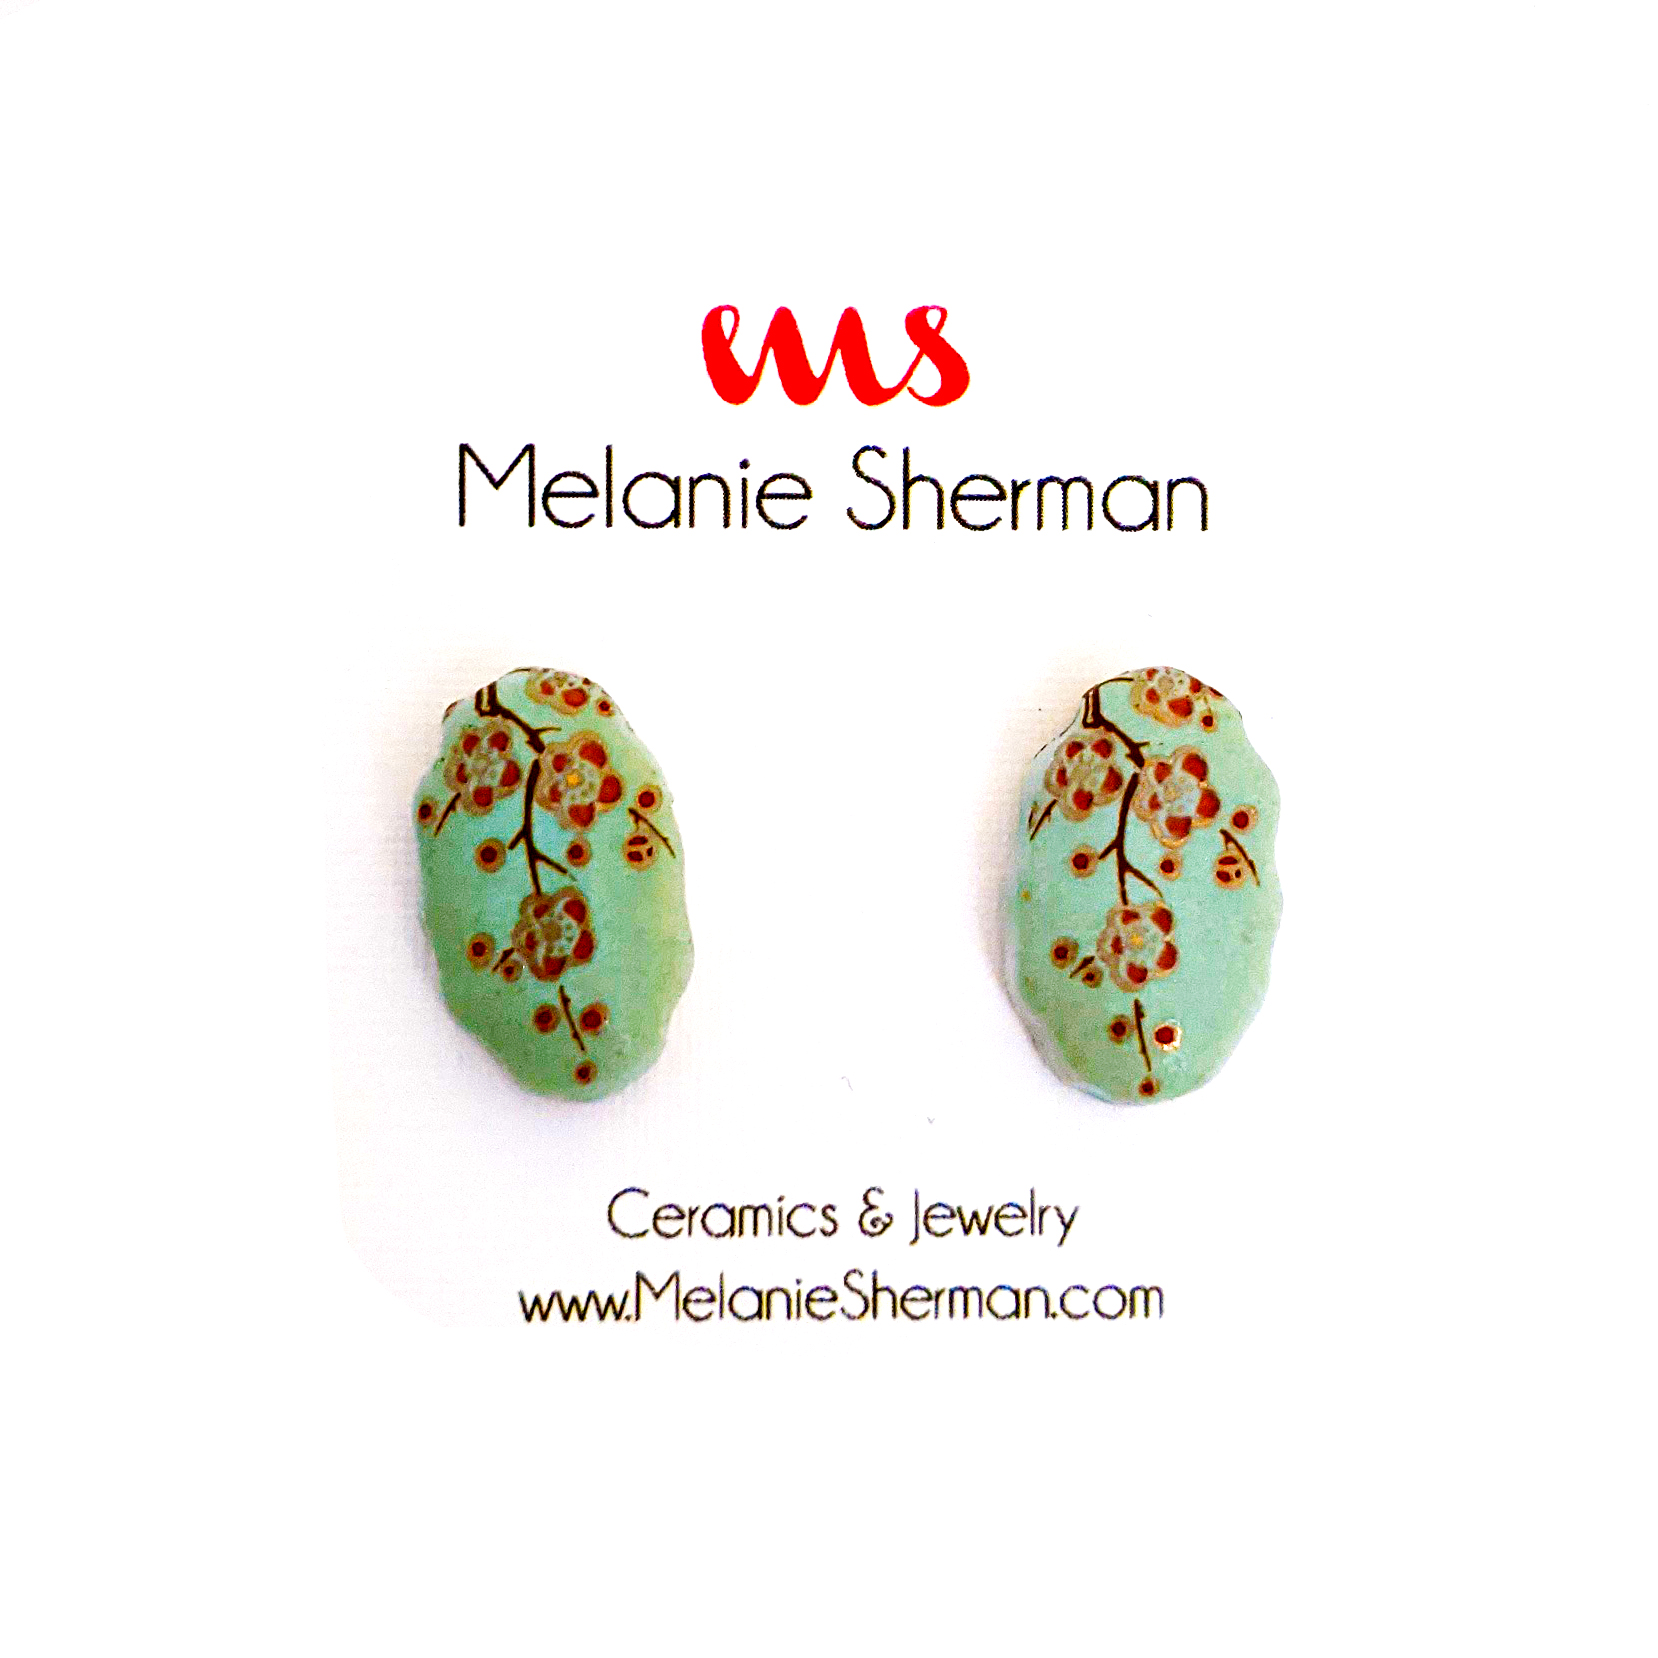 ceramic earrings burnt and glossy glazed unique jewelry ceramic jewelry White ceramic stud earrings with colorful dots